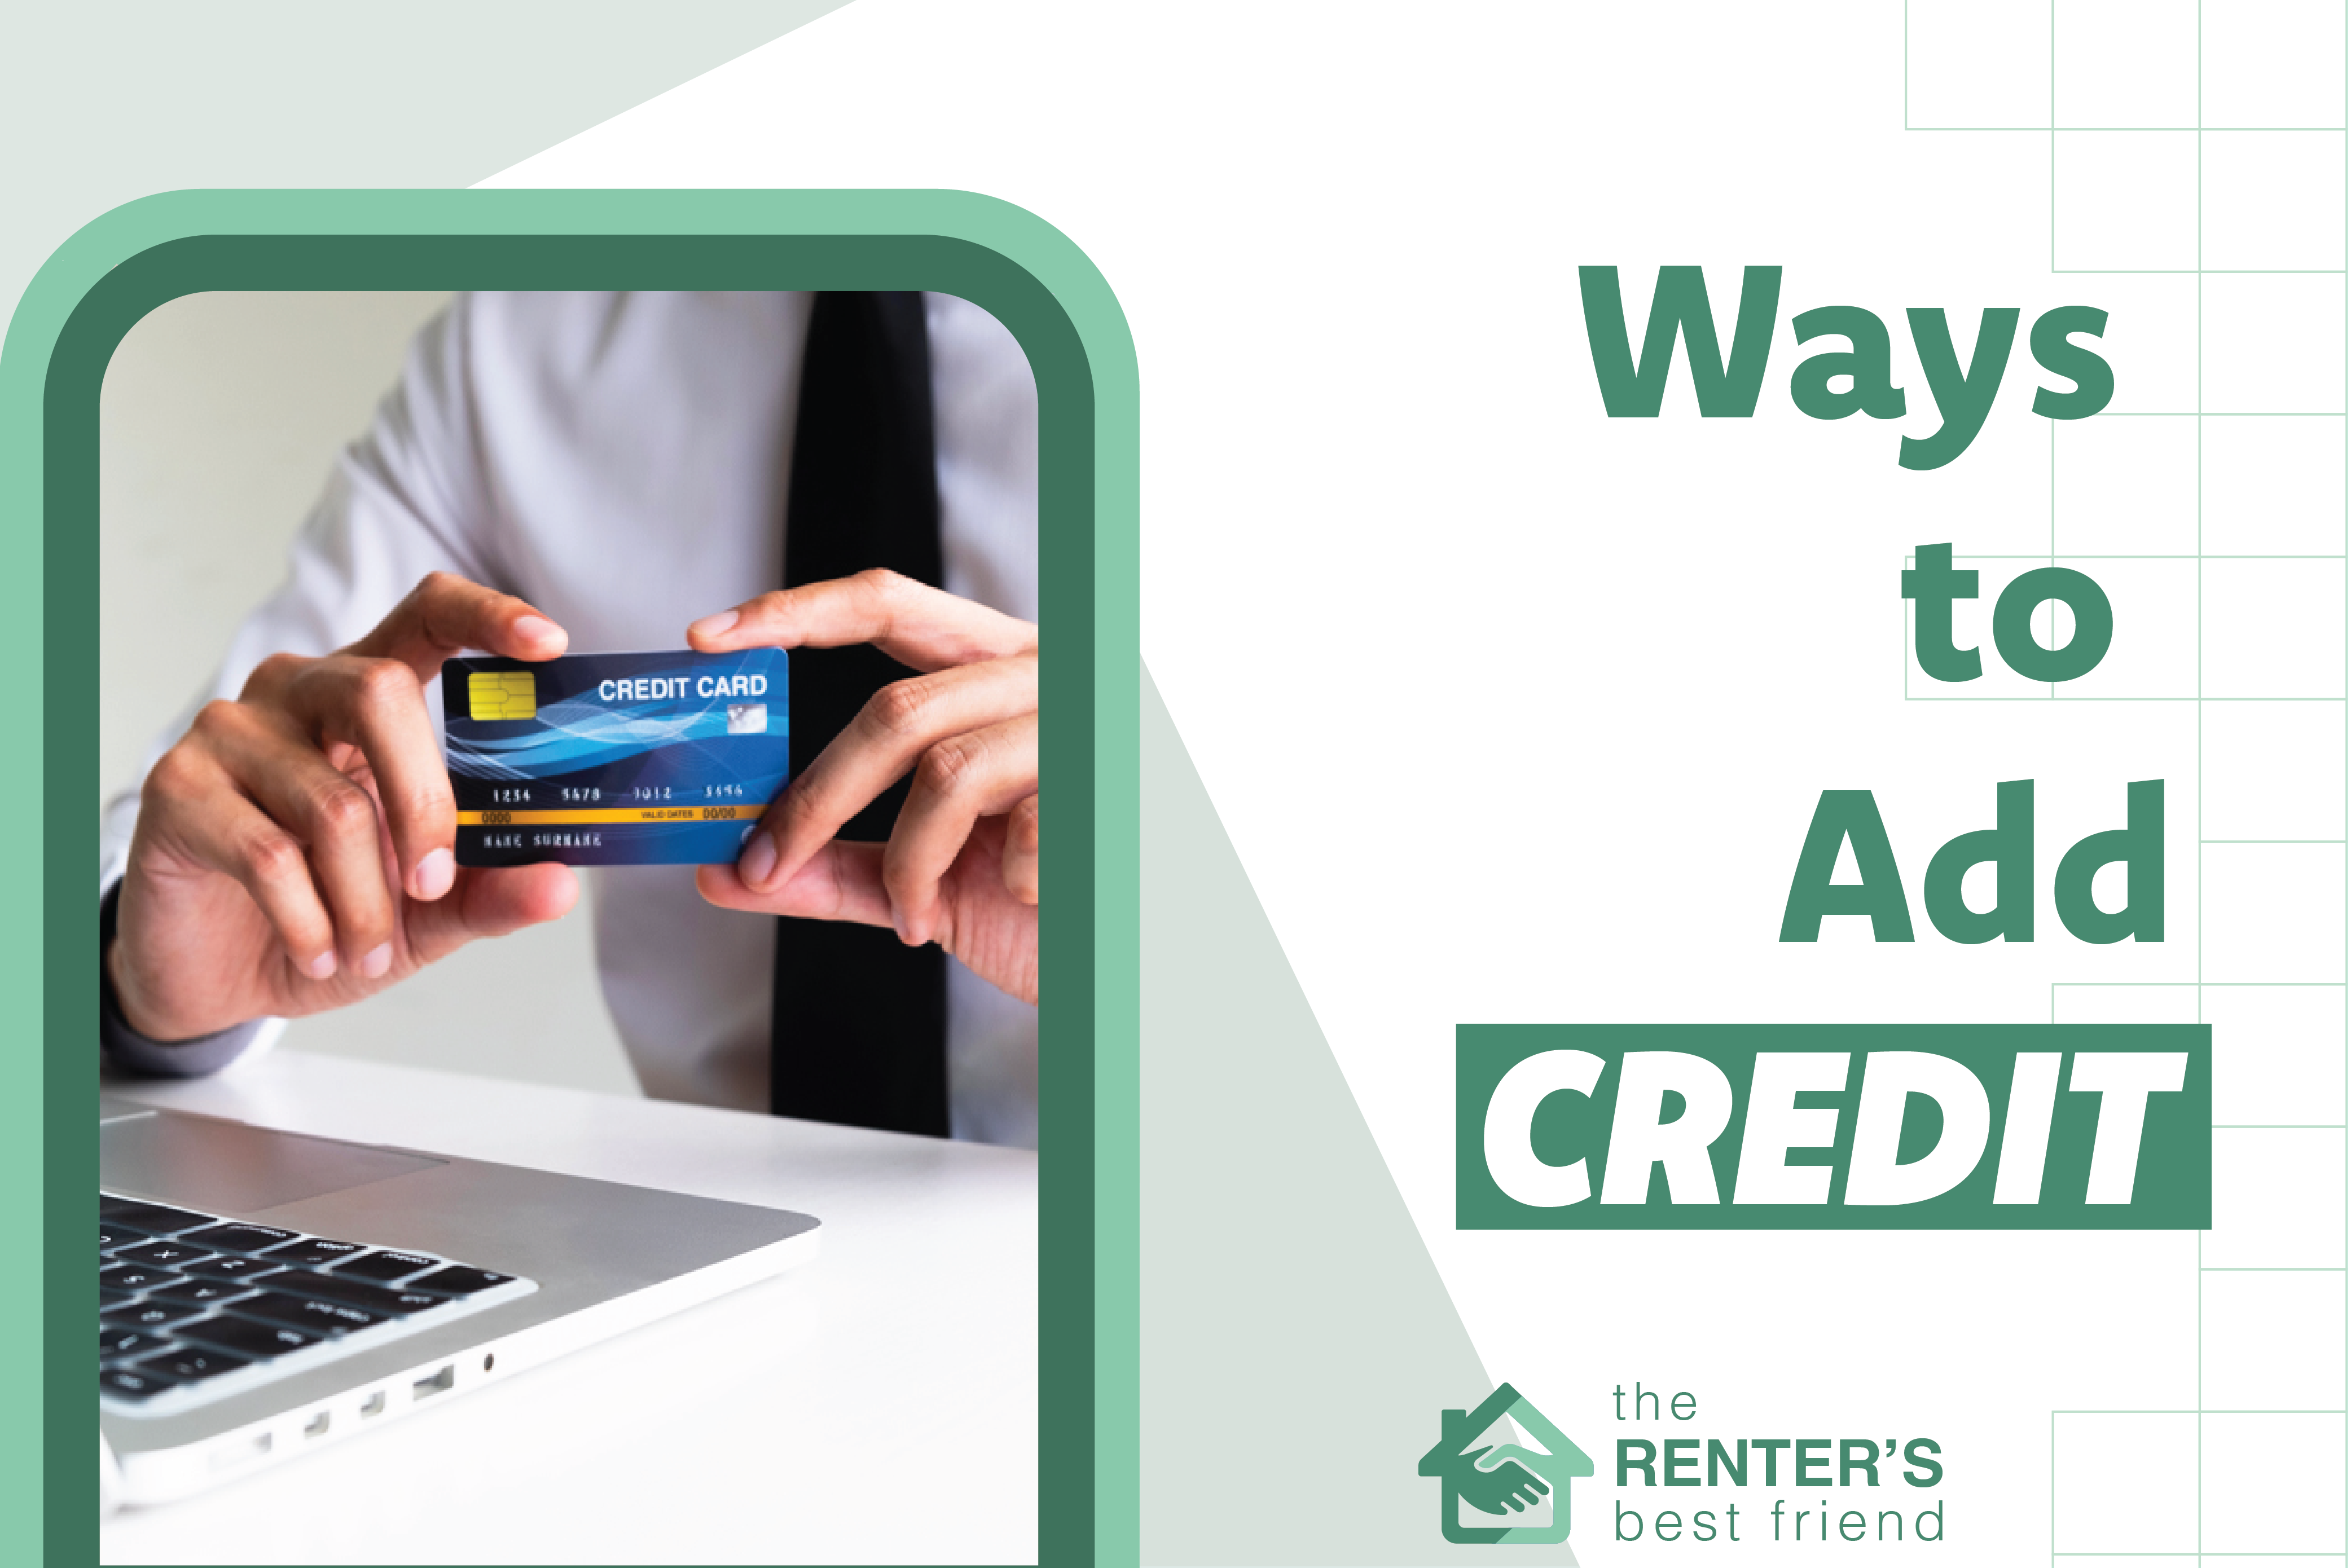 Ways to add and build credit